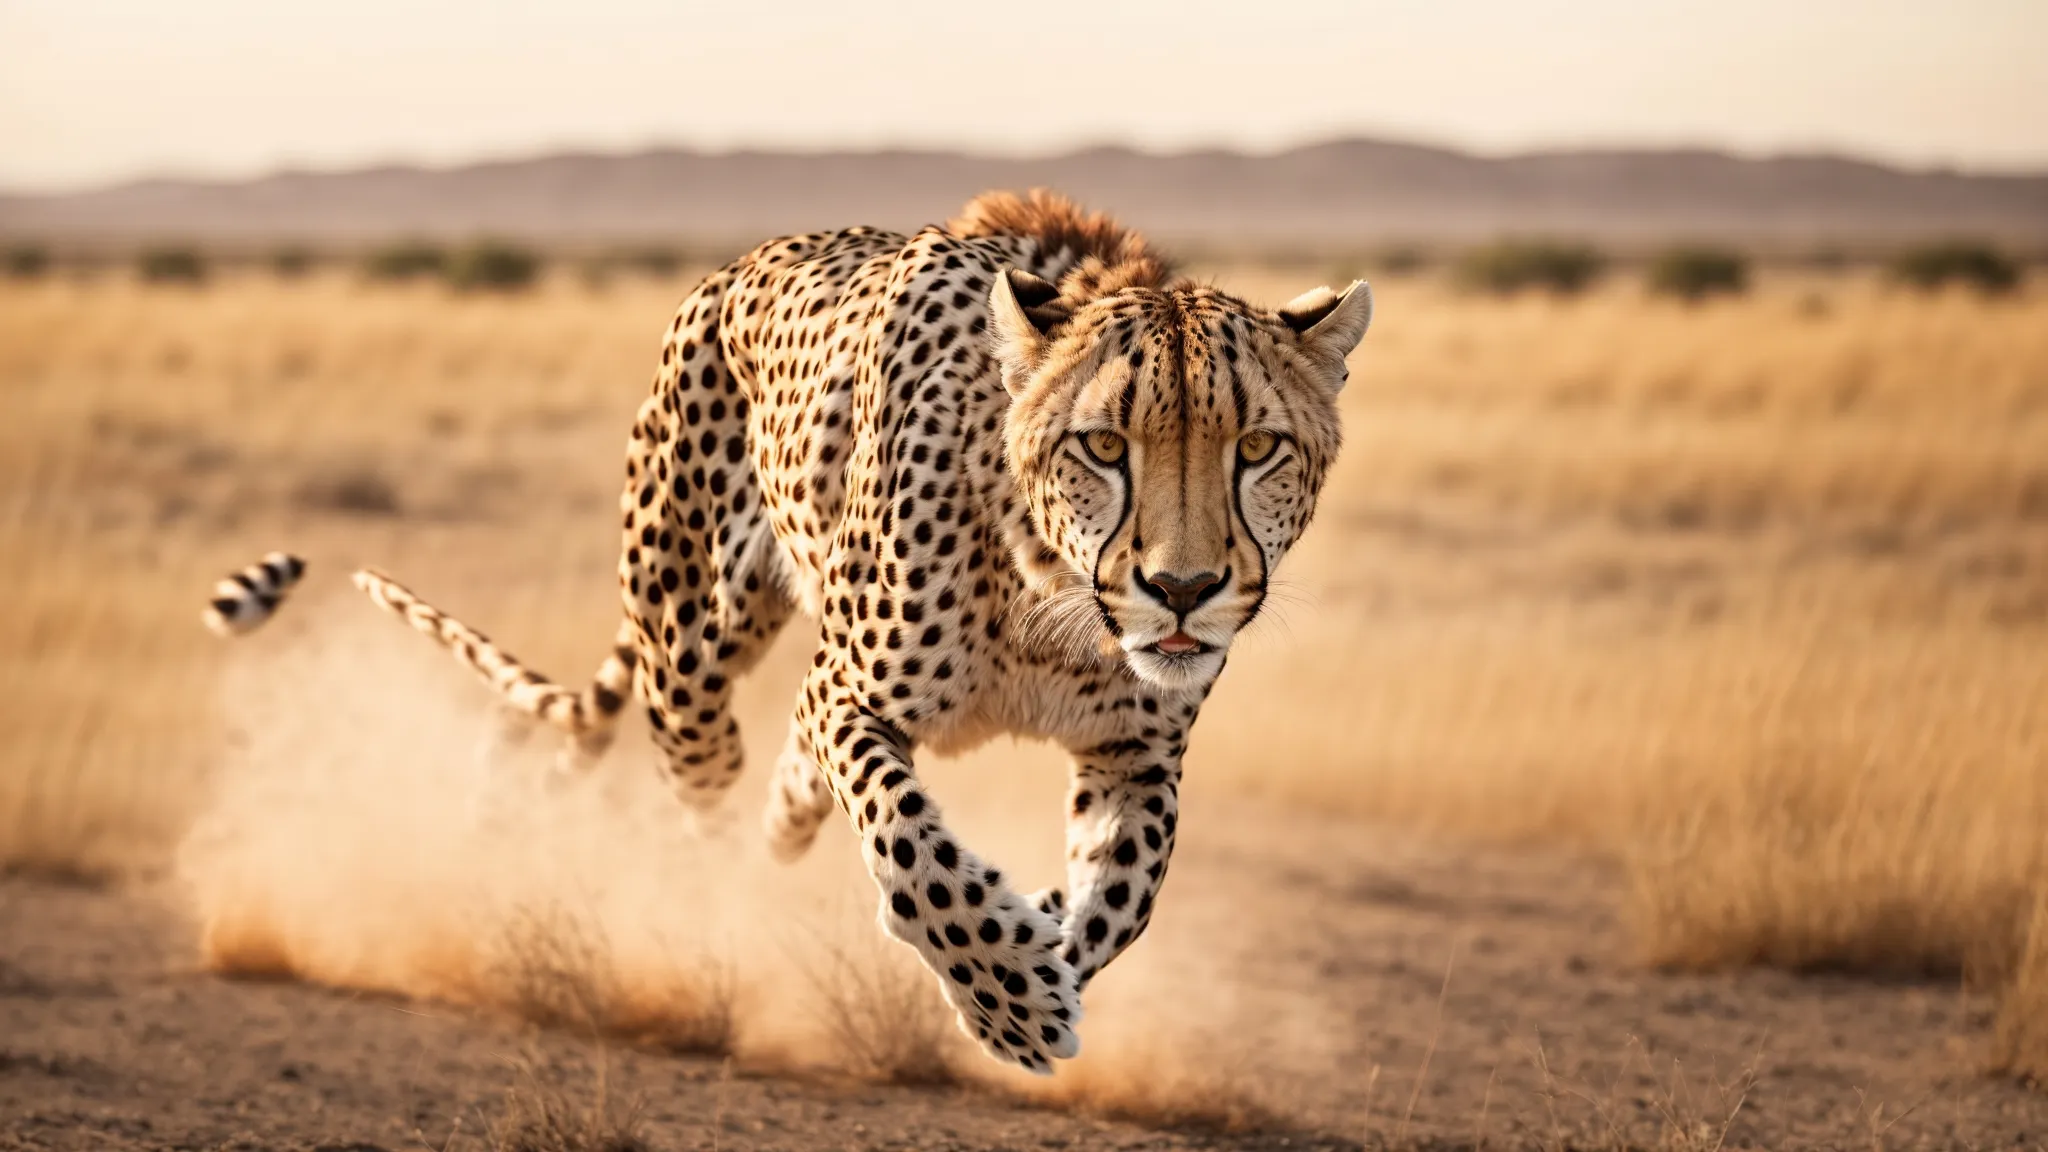 a cheetah in full sprint across an open savannah, embodying speed and power.